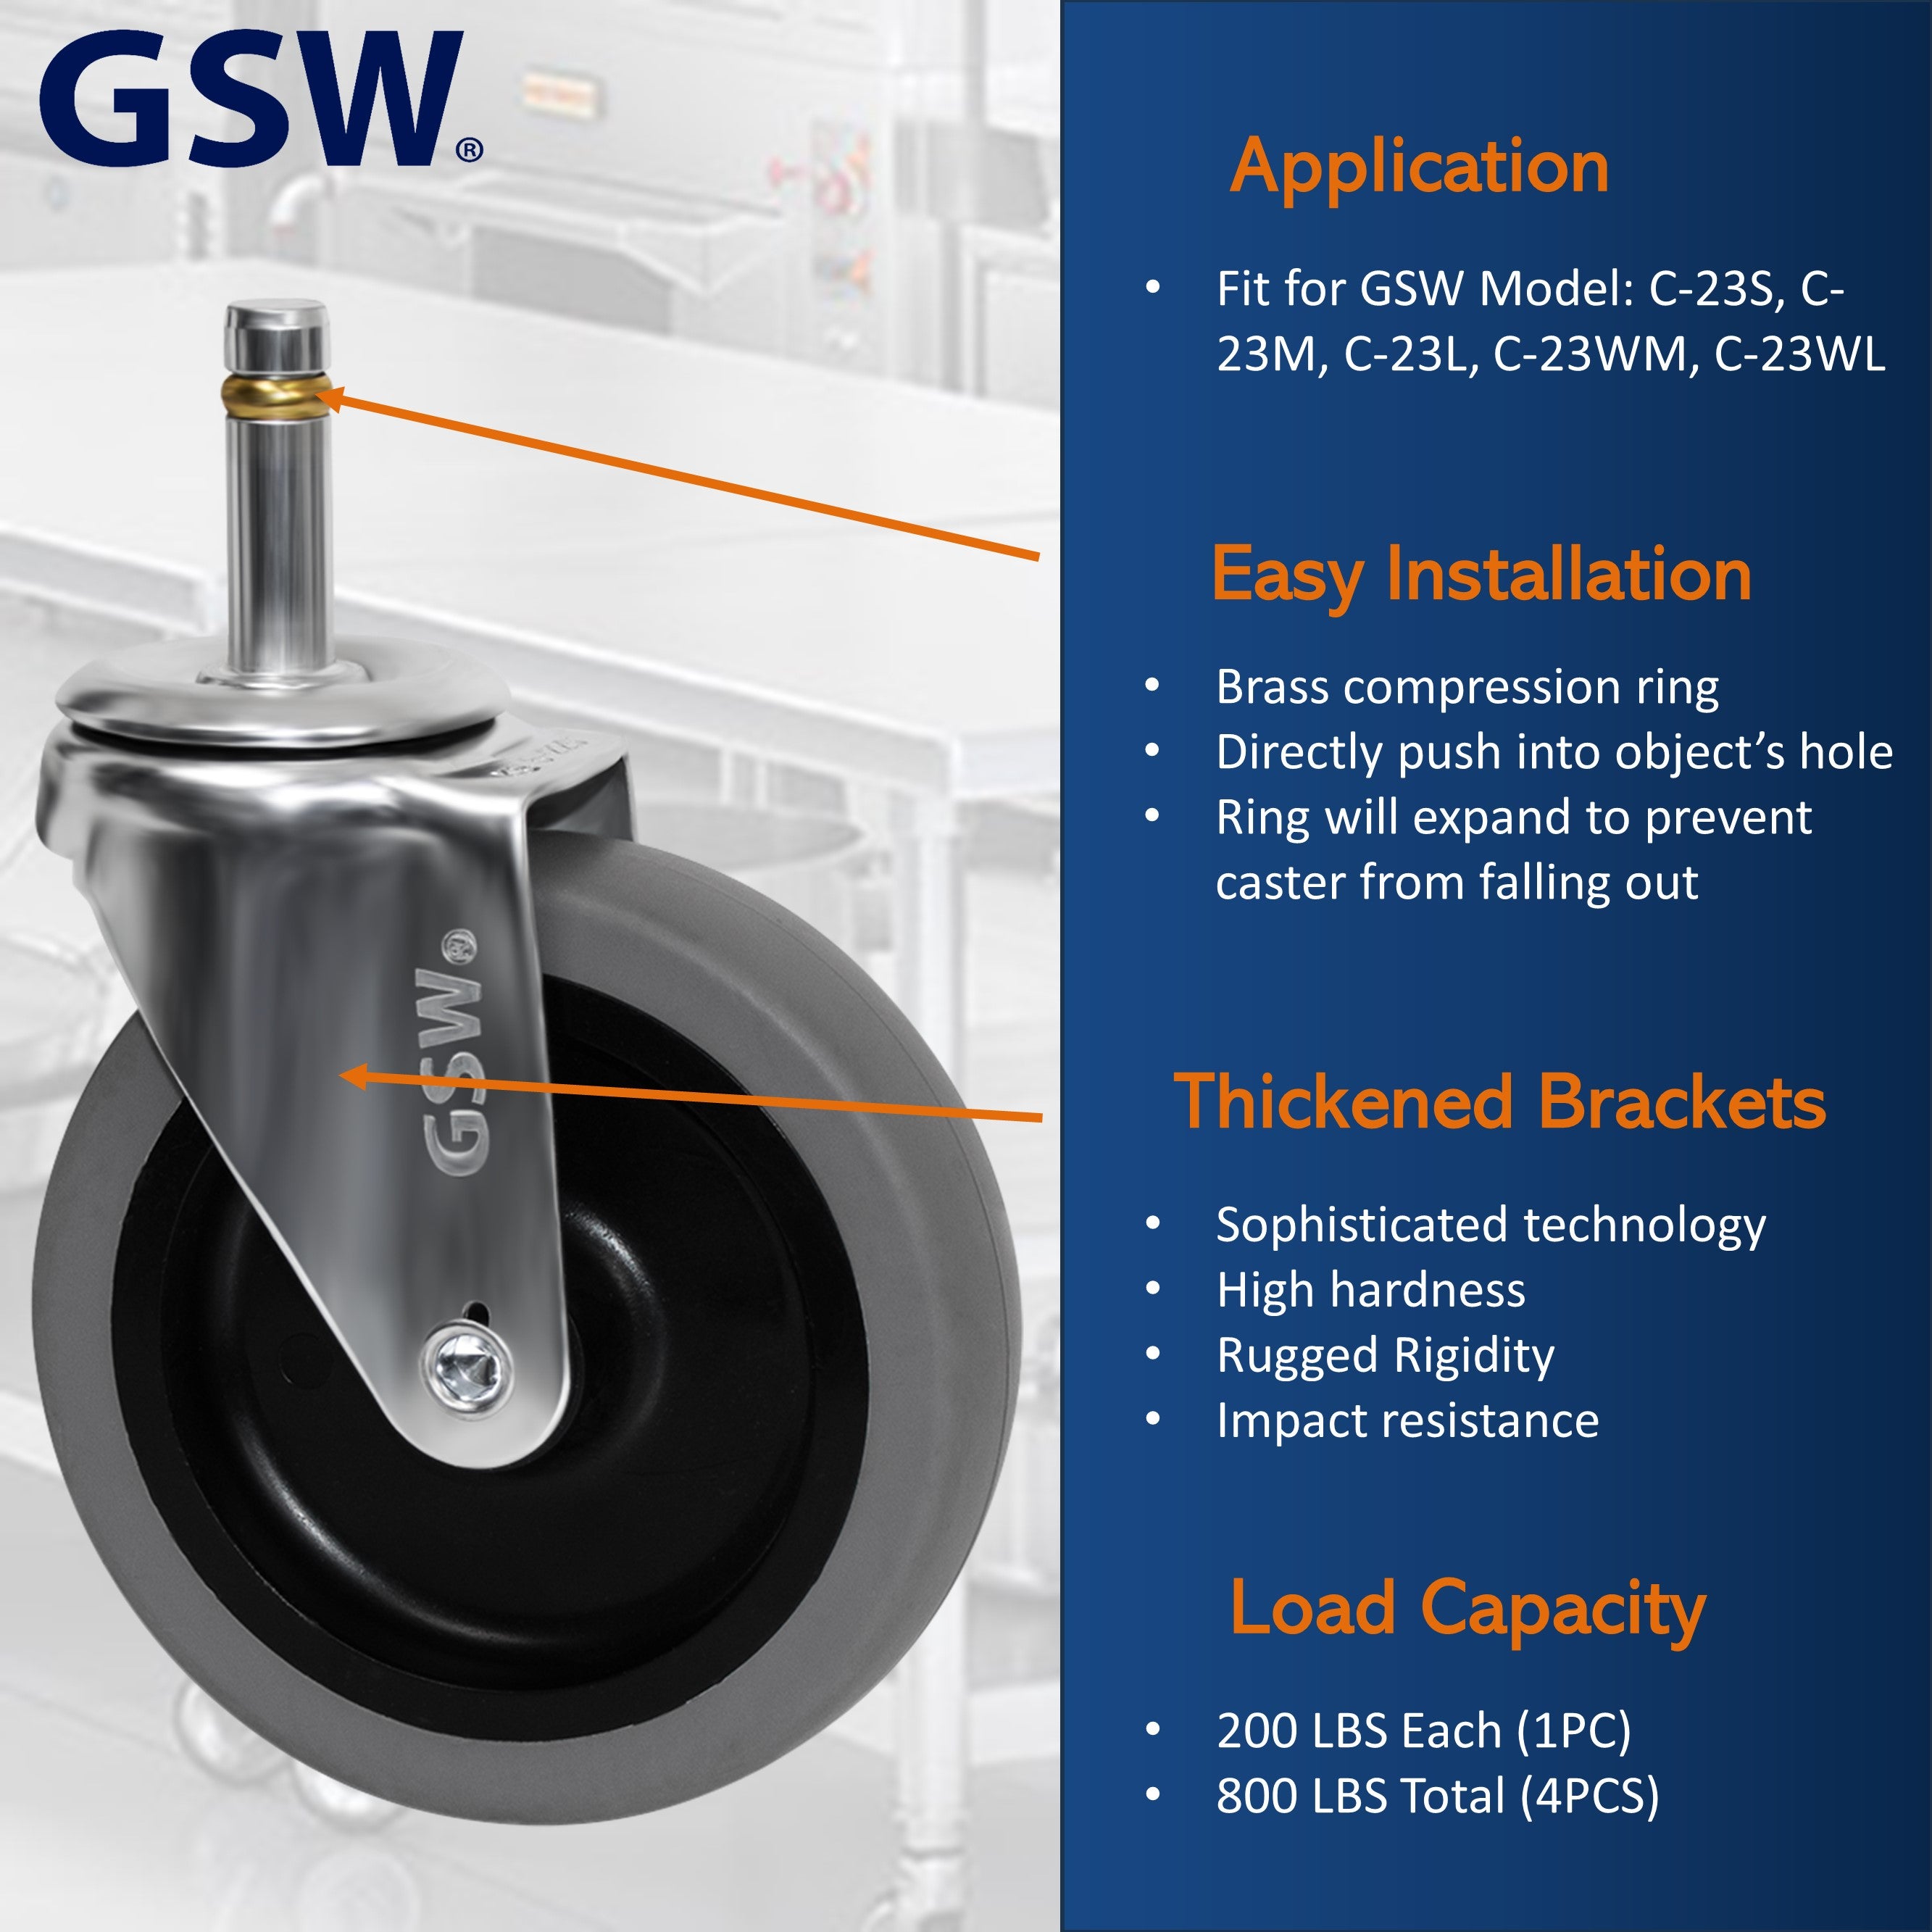 GSW 4" Caster Wheels, Polyurethane Grip Ring Stem Casters, Heavy Duty Set of 4 for GSW Cart (C-23WM & C-23WL) with Loading Capacity of 800 Lbs (Swivel With Brake)